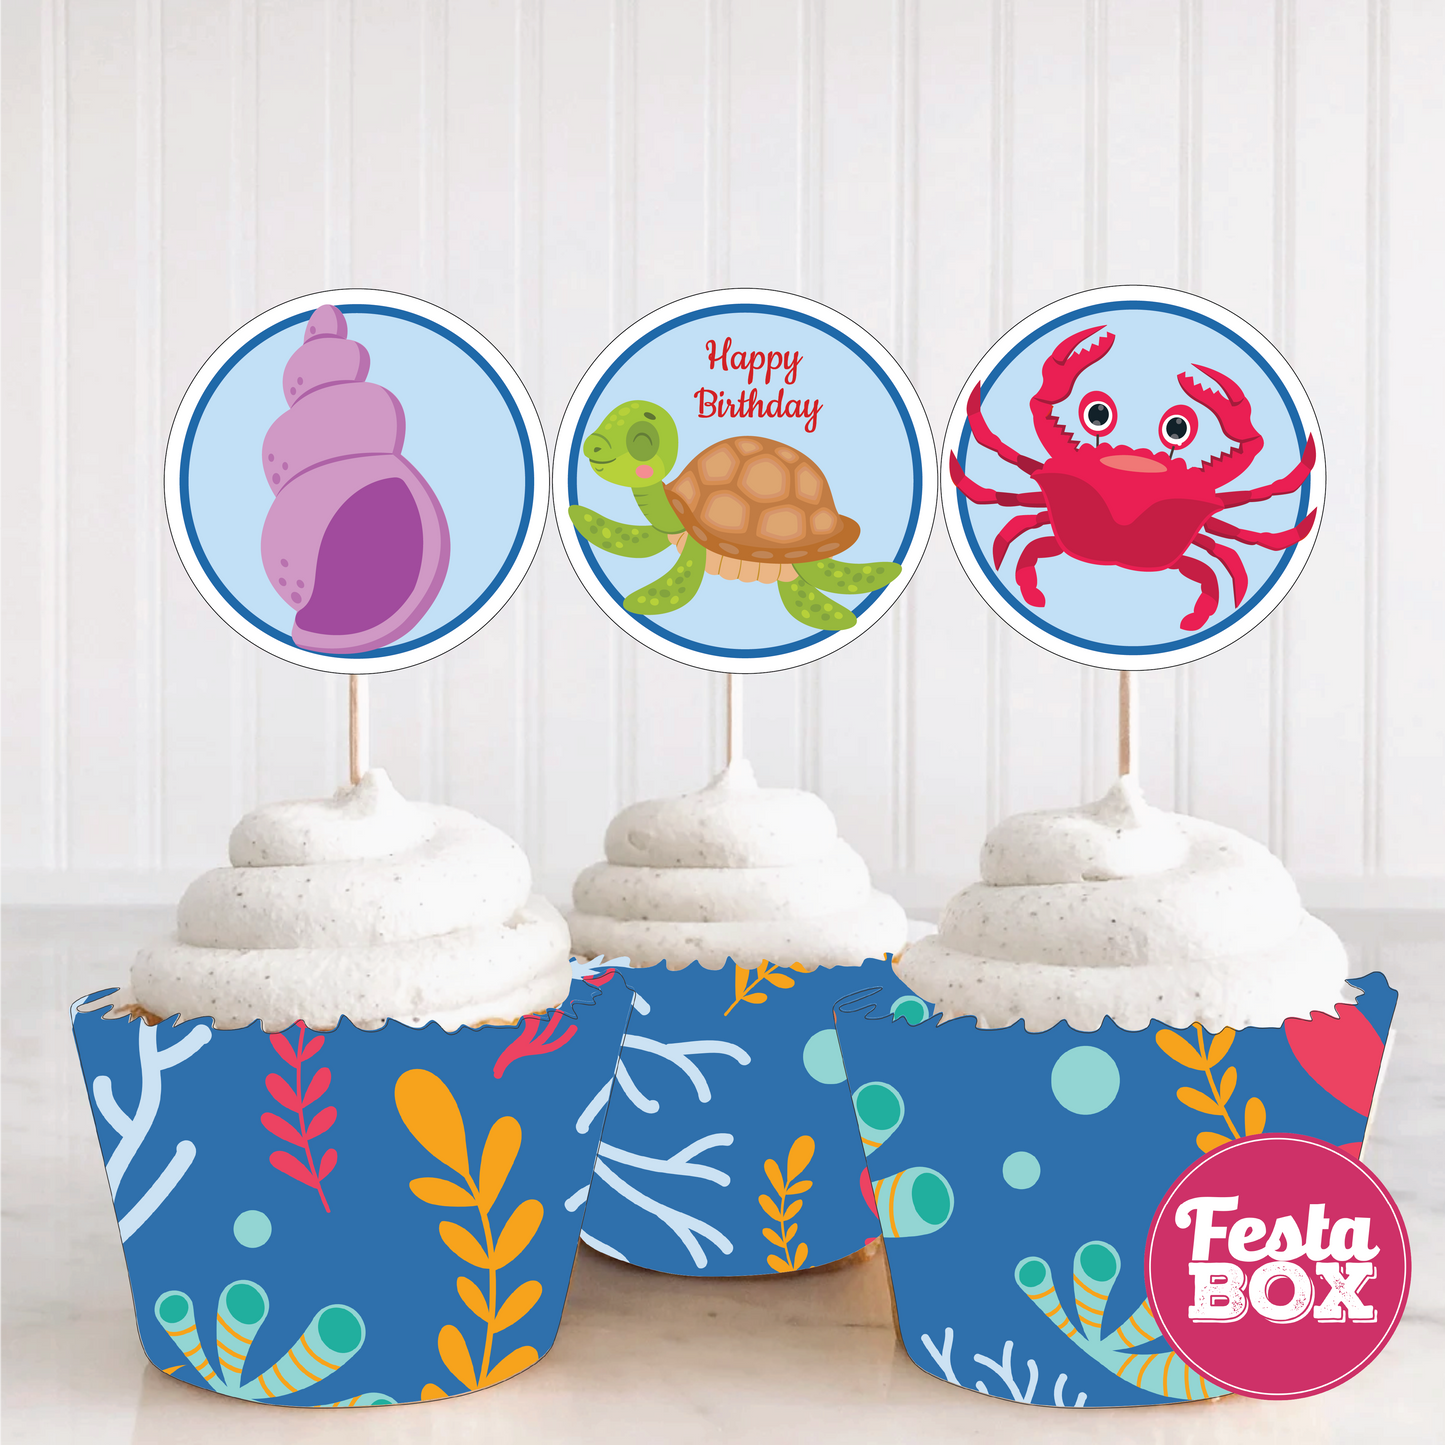 Cupcake Topper Birthday Party Decoration - Under the Sea Theme (Set of 6) - Assorted - Option 1